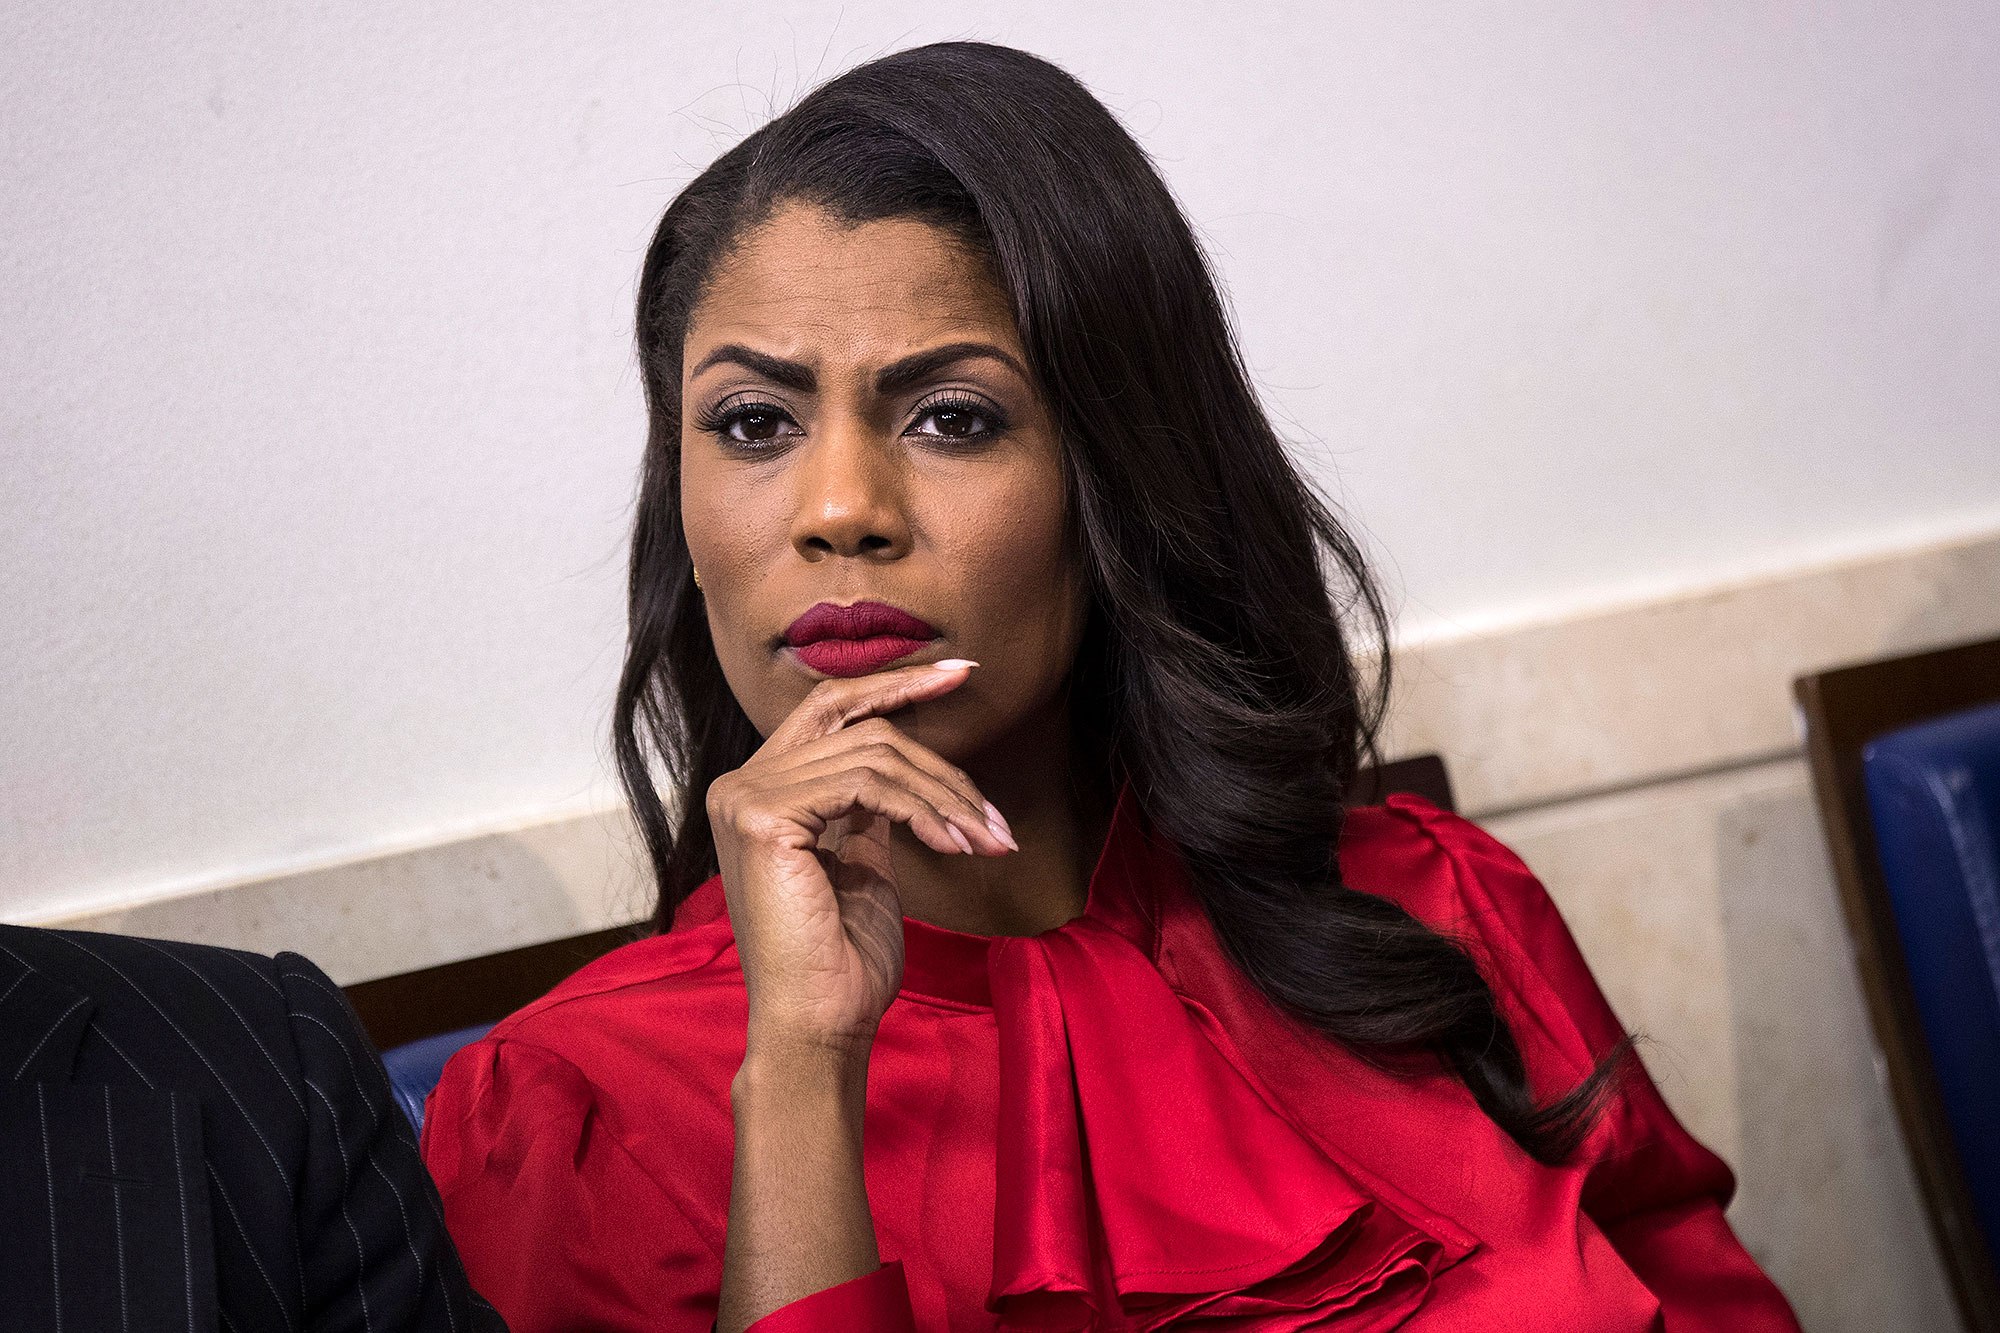 Donald Trump Called His Former Aide Omarosa a “Dog”